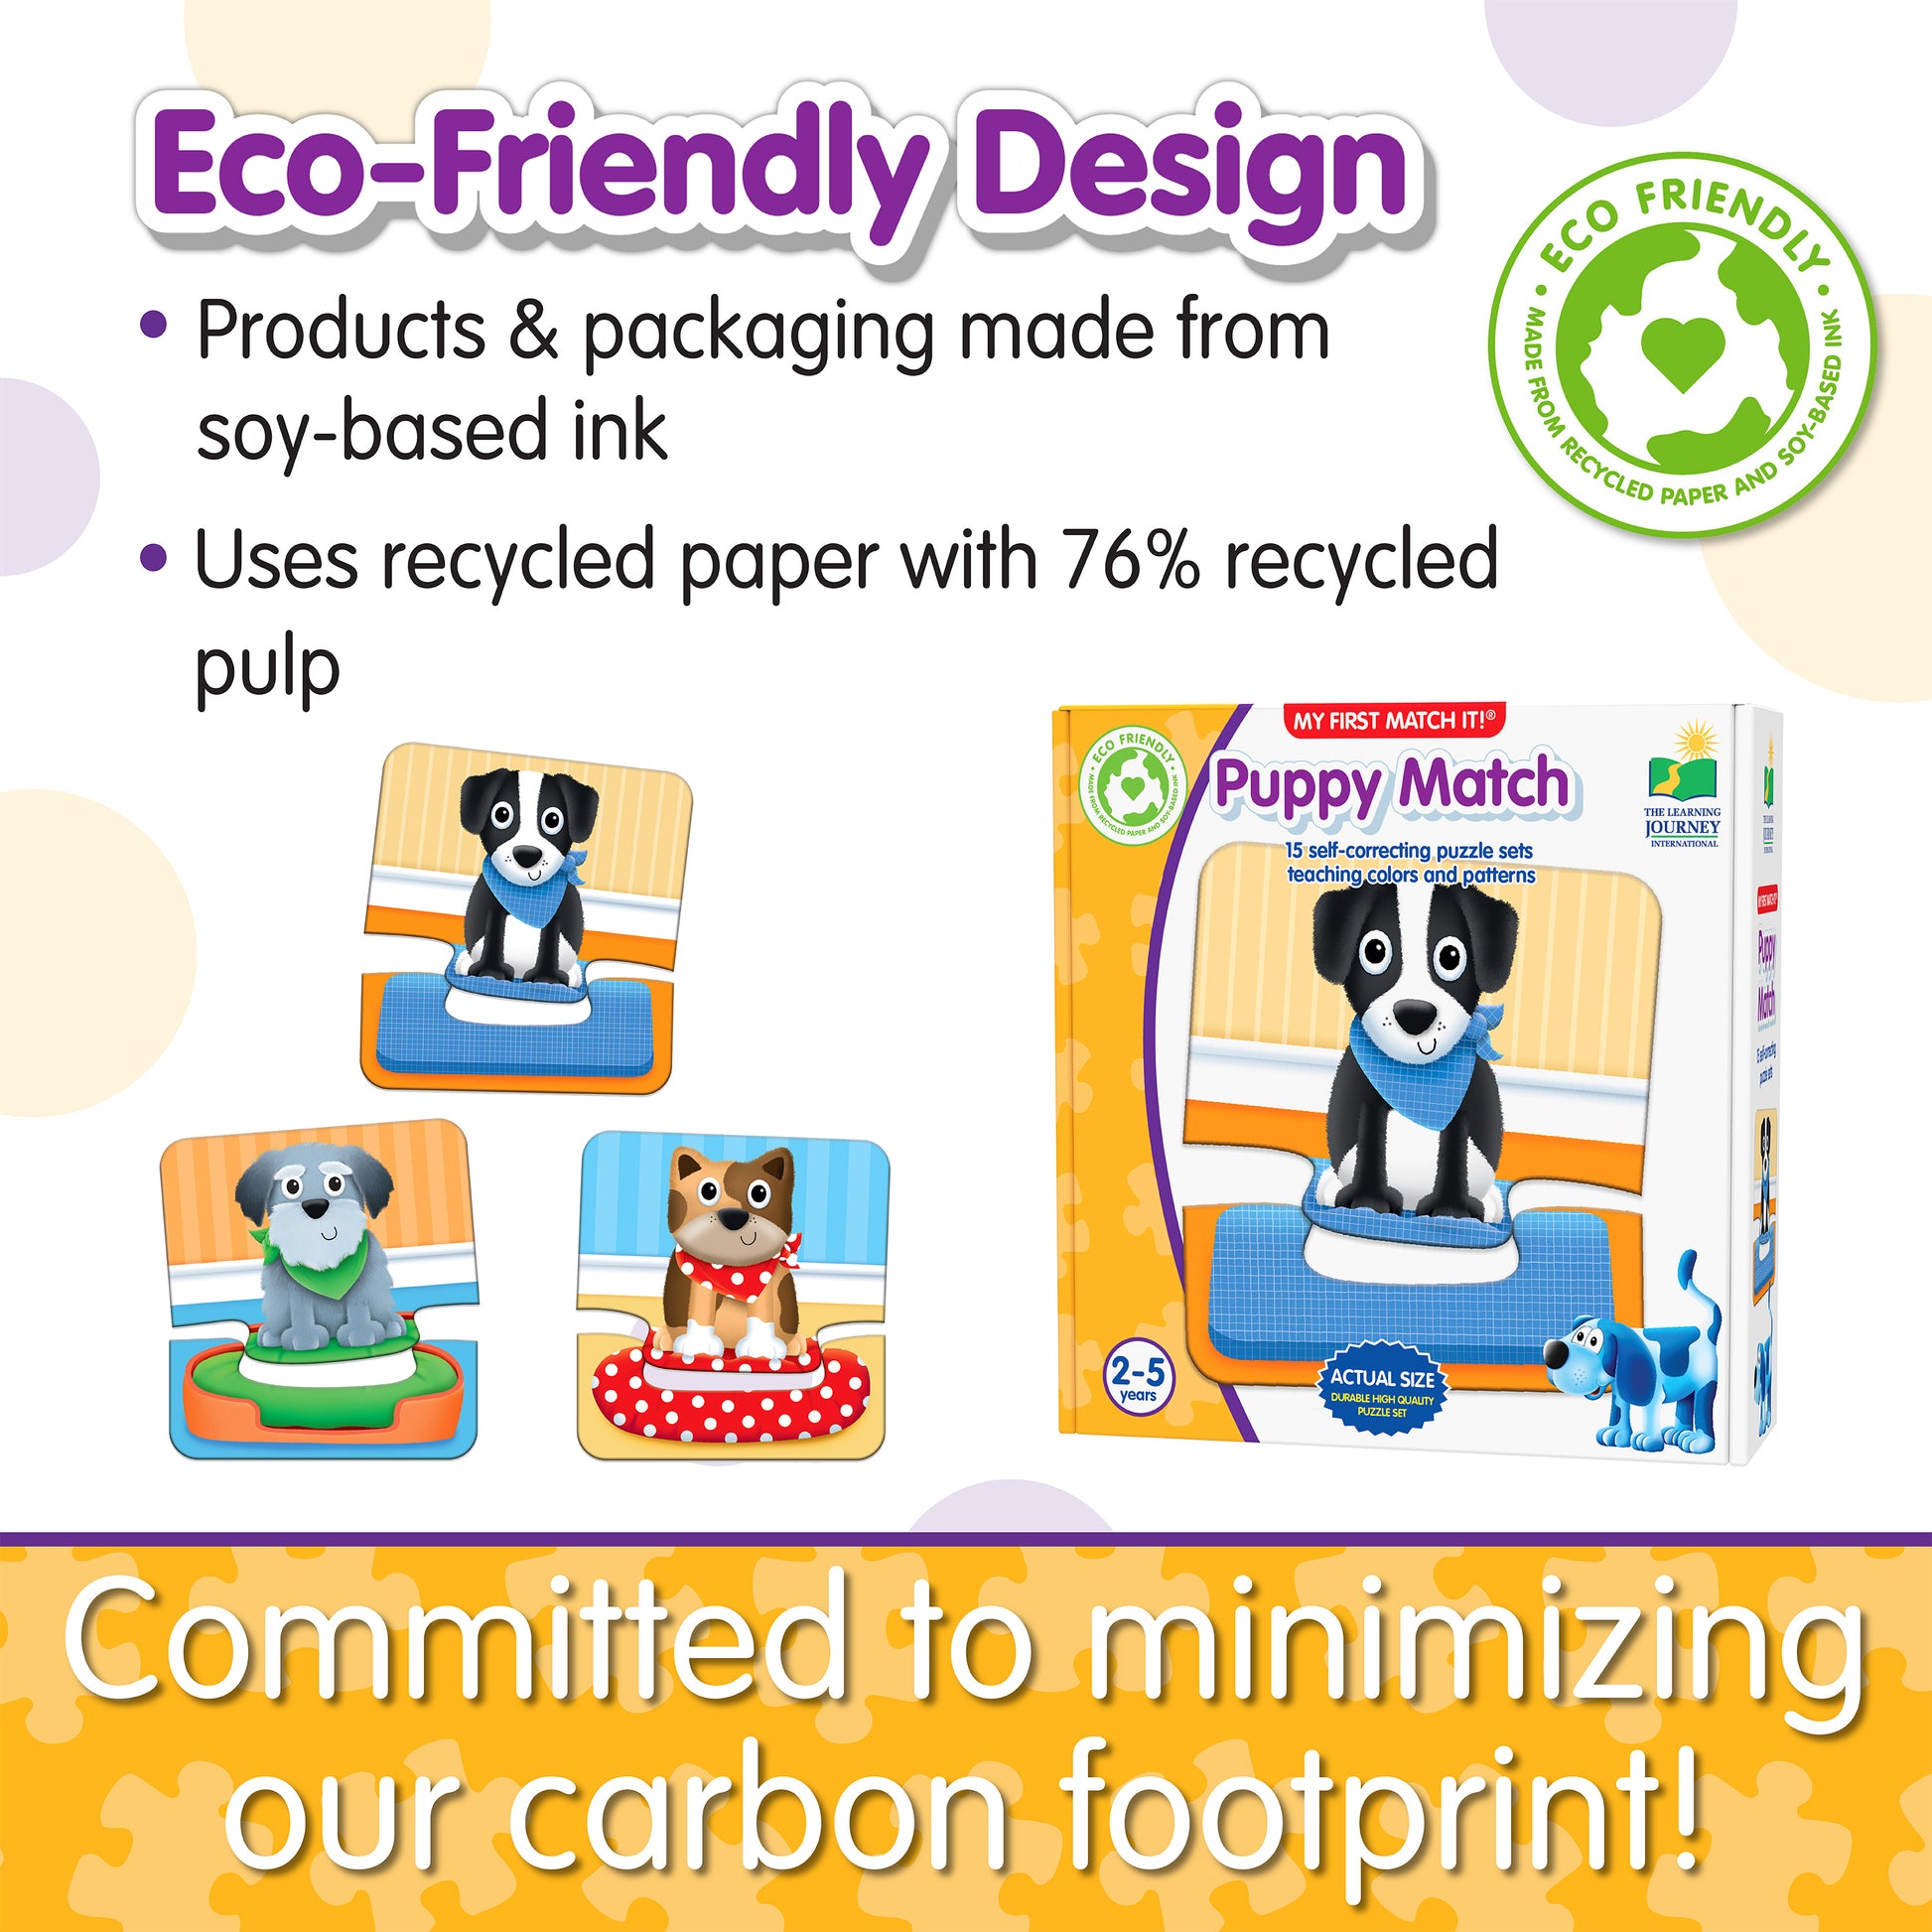 Infographic about Puppy Match's eco-friendly design